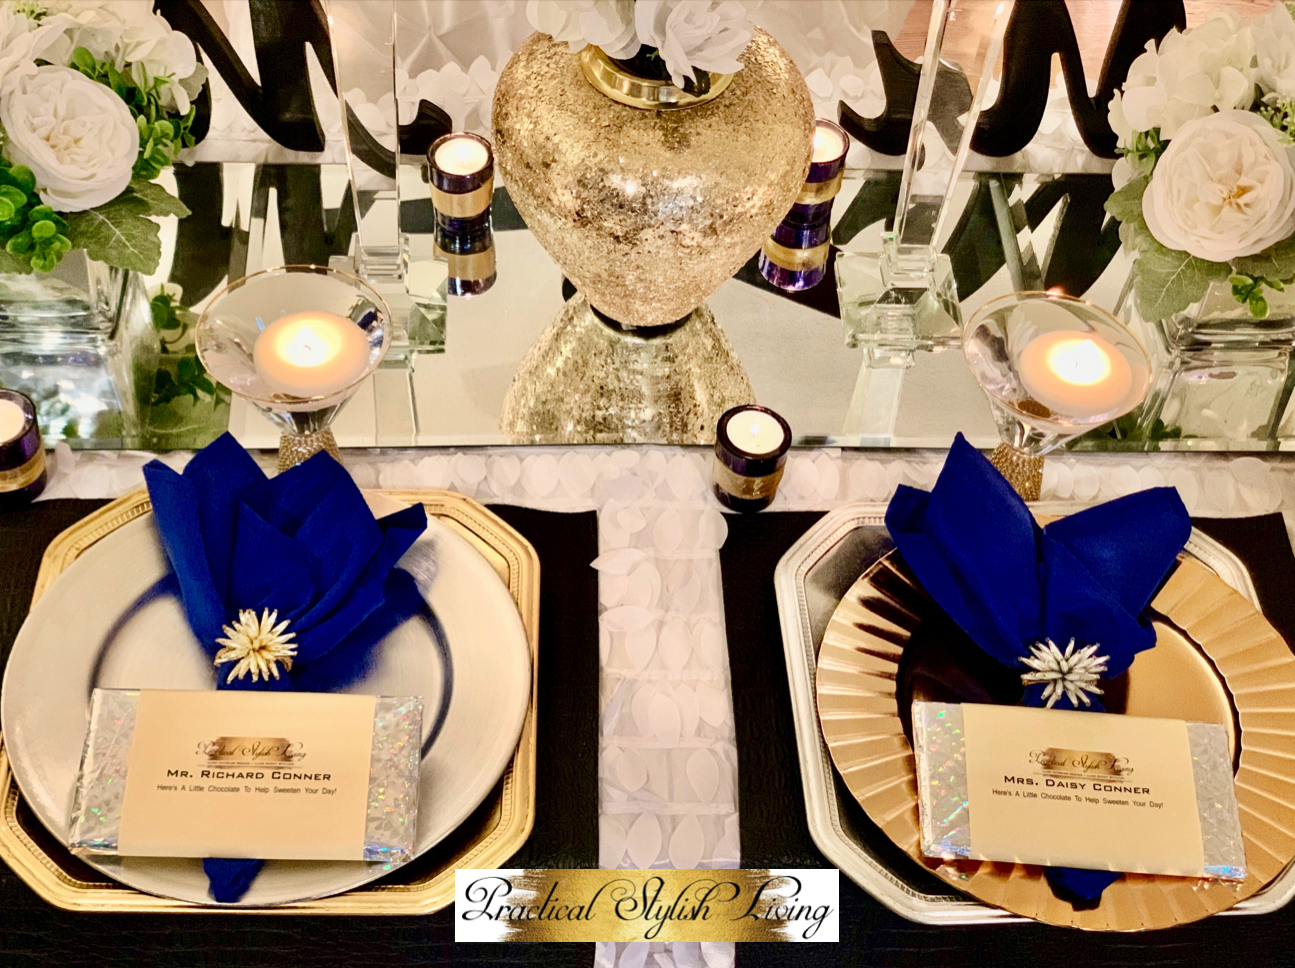 Practical Stylish Living | Kimberly R. Jones | Lifestyle & Home Entertaining Expert Royal blue antique gold and silver wedding table setting